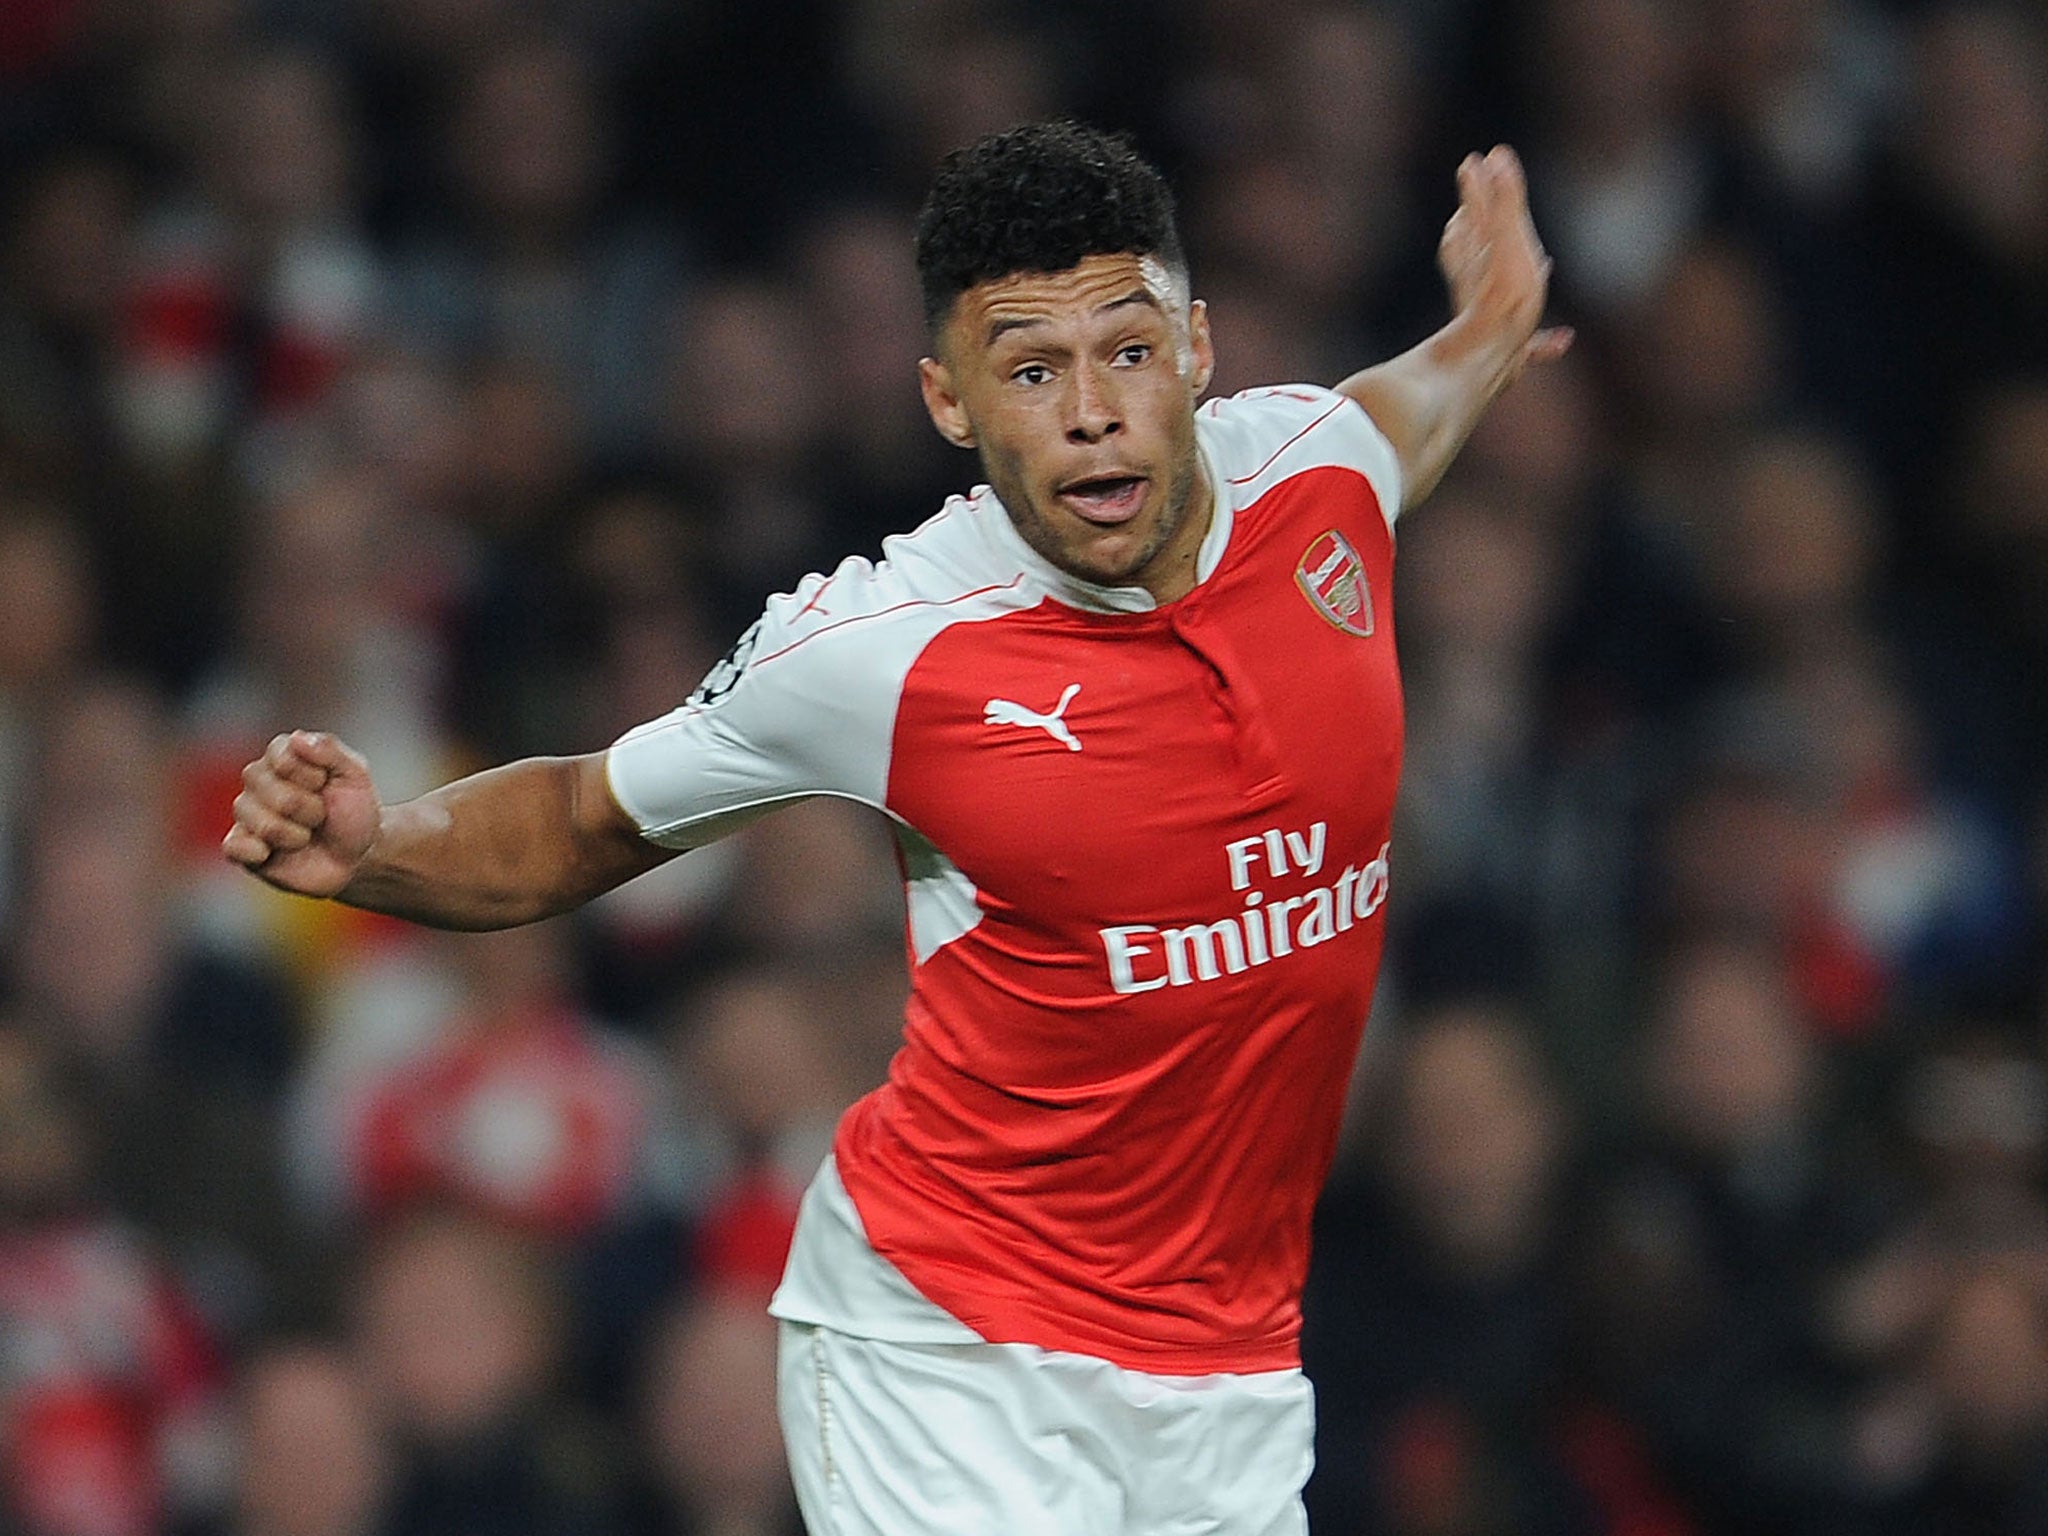 Alex Oxlade-Chamberlain was named as every player in Arsenal's 18-man squad to face Tottenham